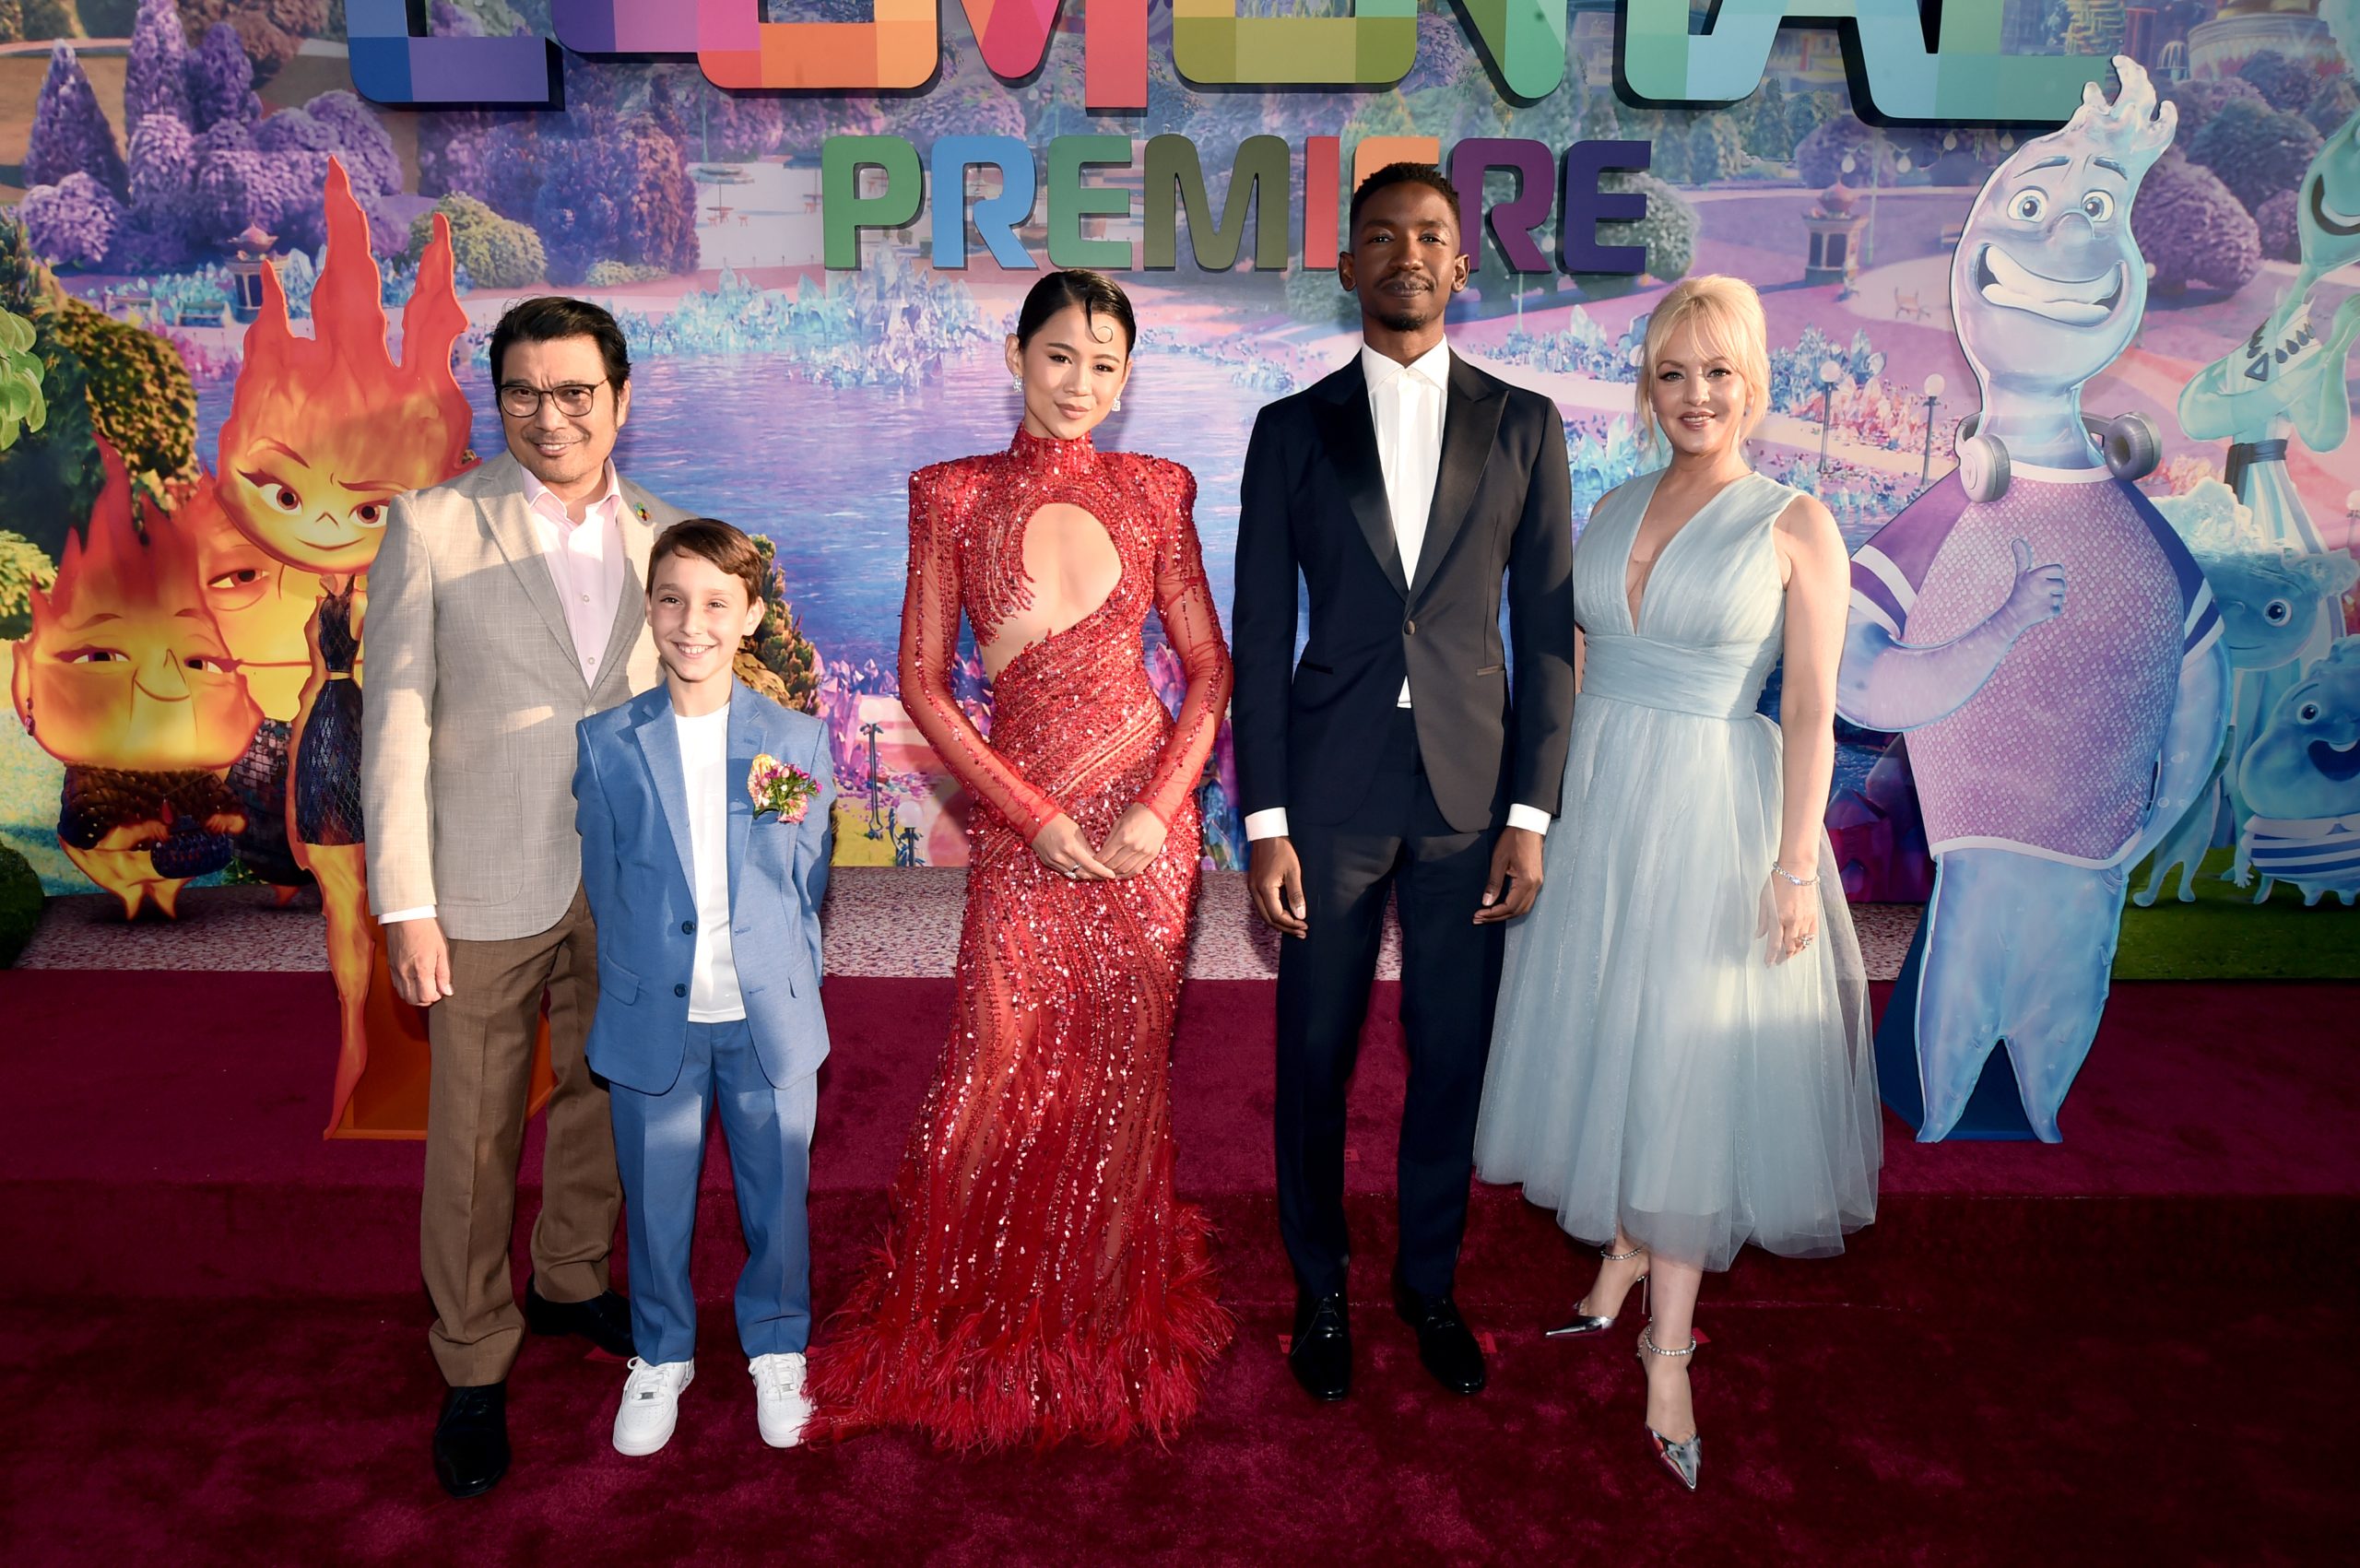 World Premiere For Disney And Pixar's Feature Film "Elemental": (L-R) Ronnie del Carmen, Mason Wertheimer, Leah Lewis, Mamoudou Athie and Wendi McLendon-Covey attend the World Premiere of Disney and Pixar's feature film "Elemental" at Academy Museum of Motion Pictures in Los Angeles, California on June 08, 2023. 